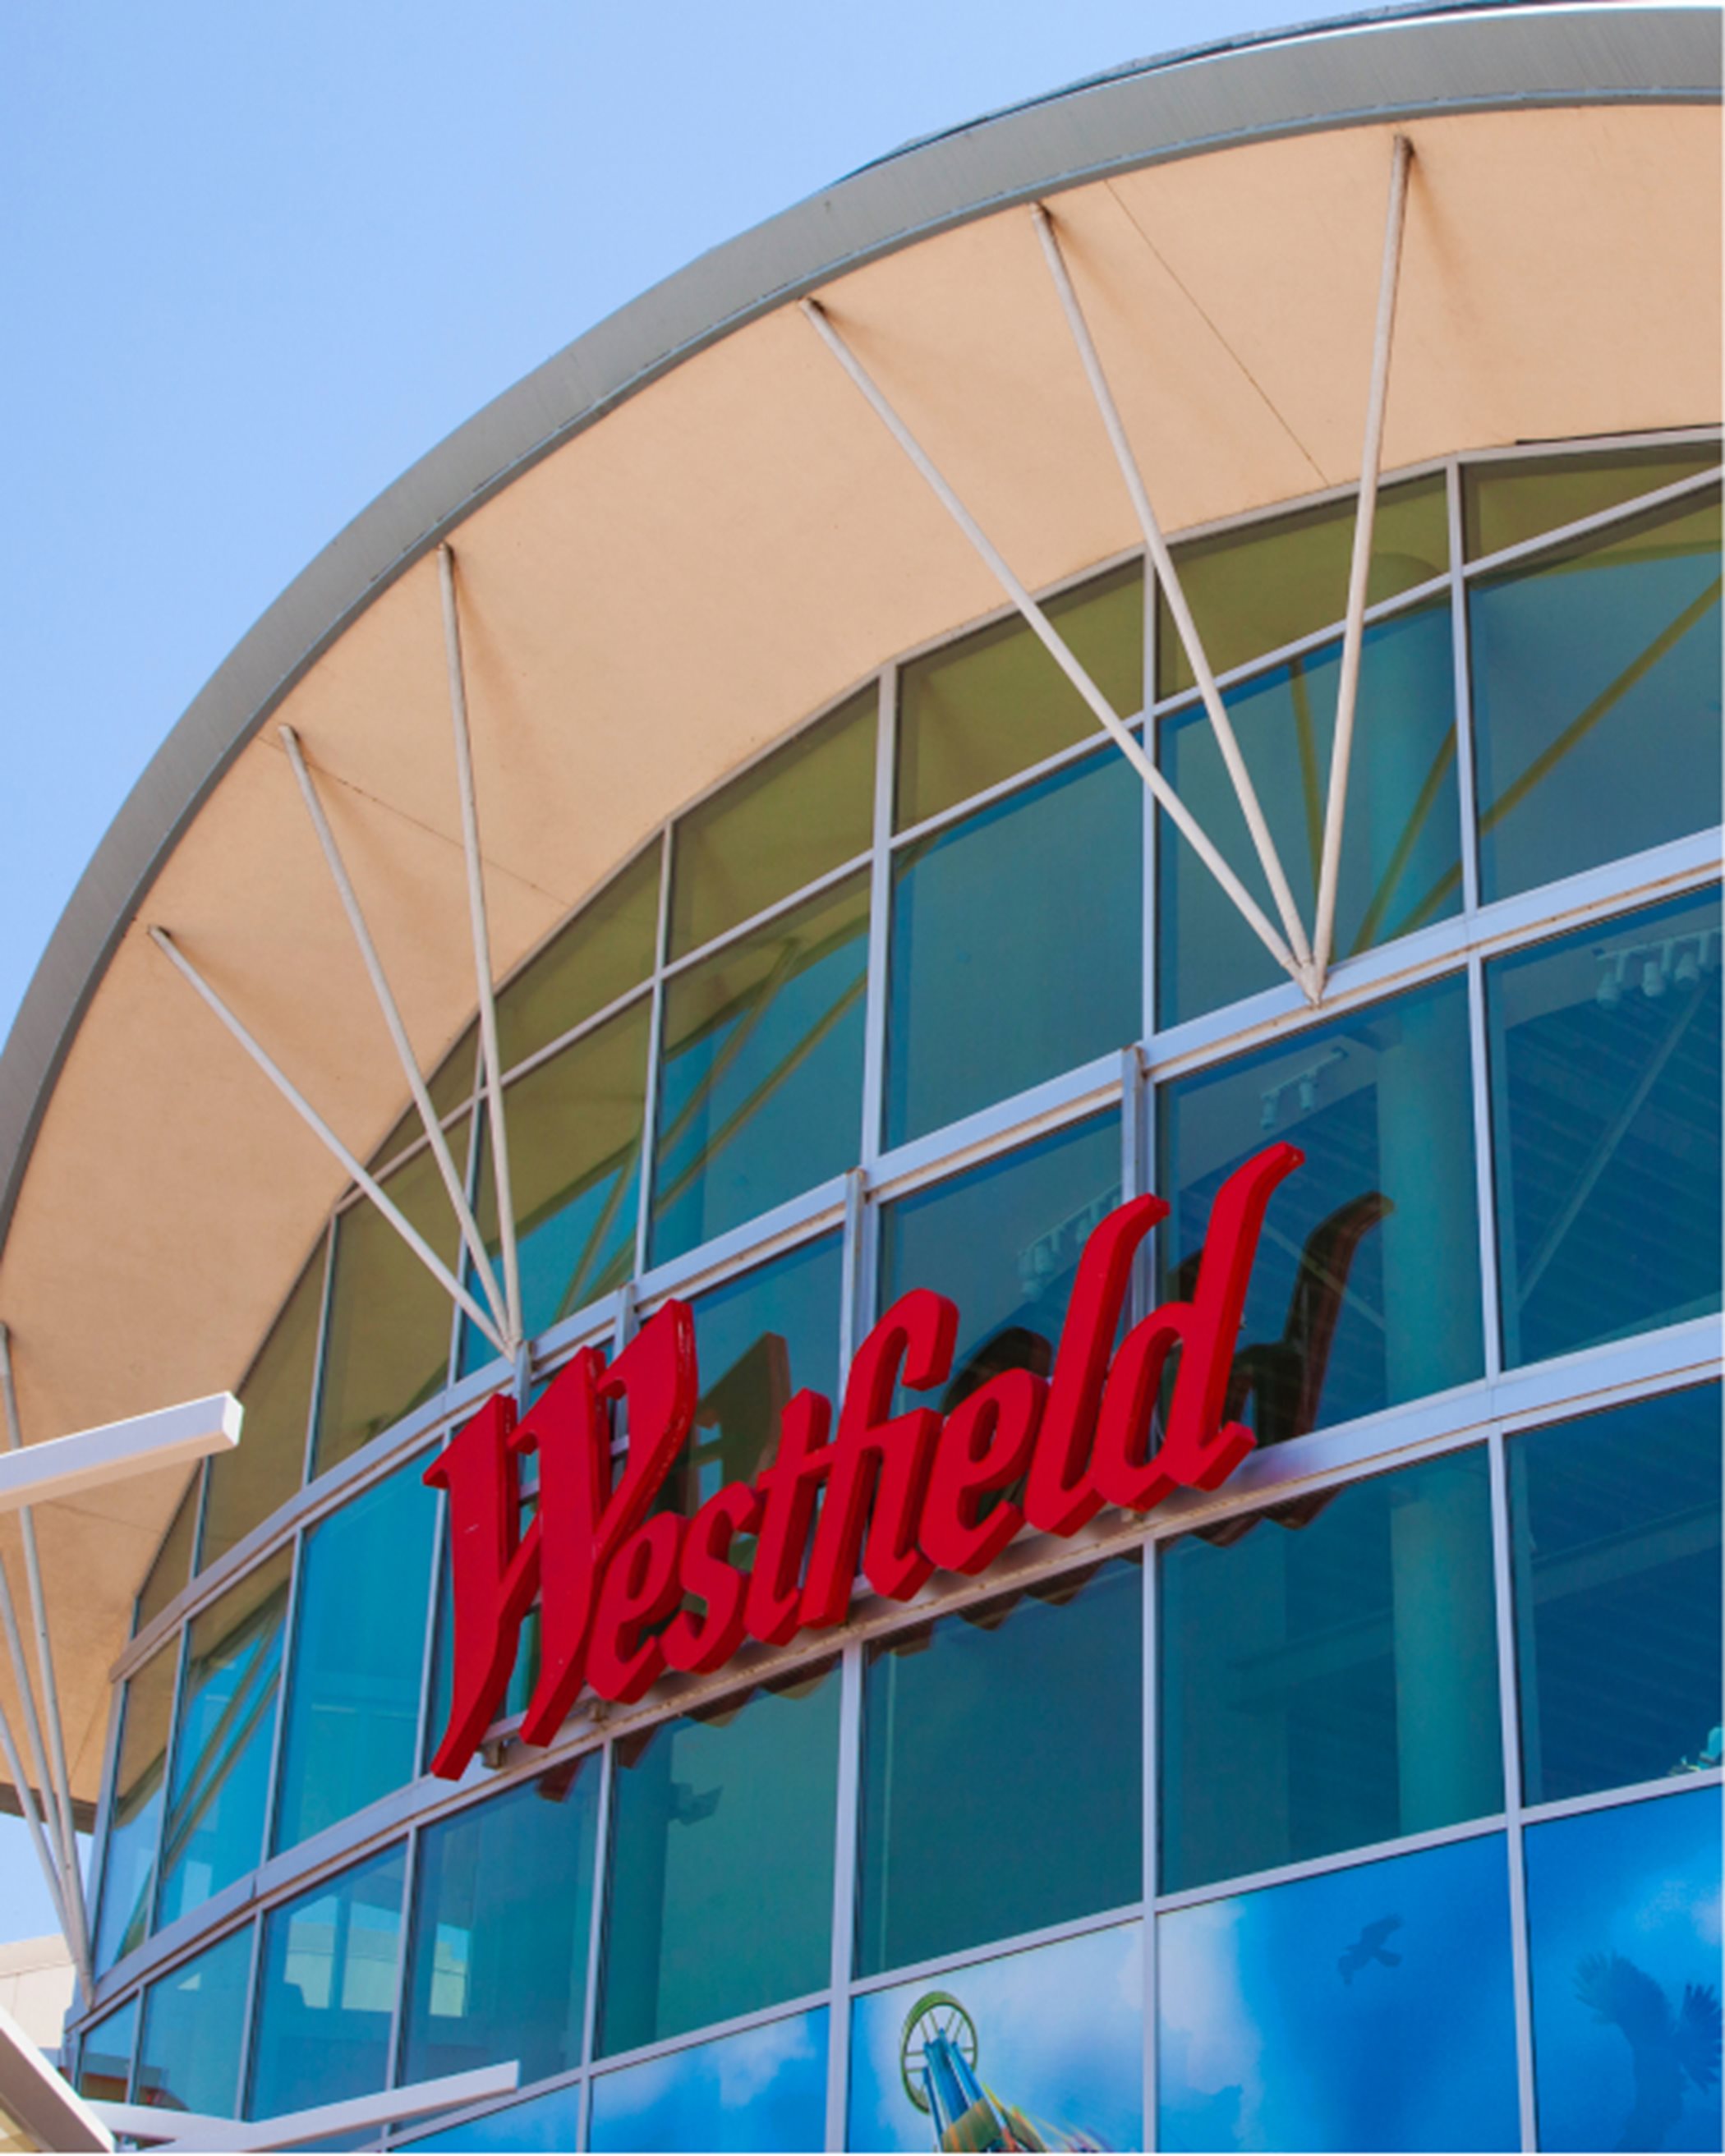 Close up of Westfield sign